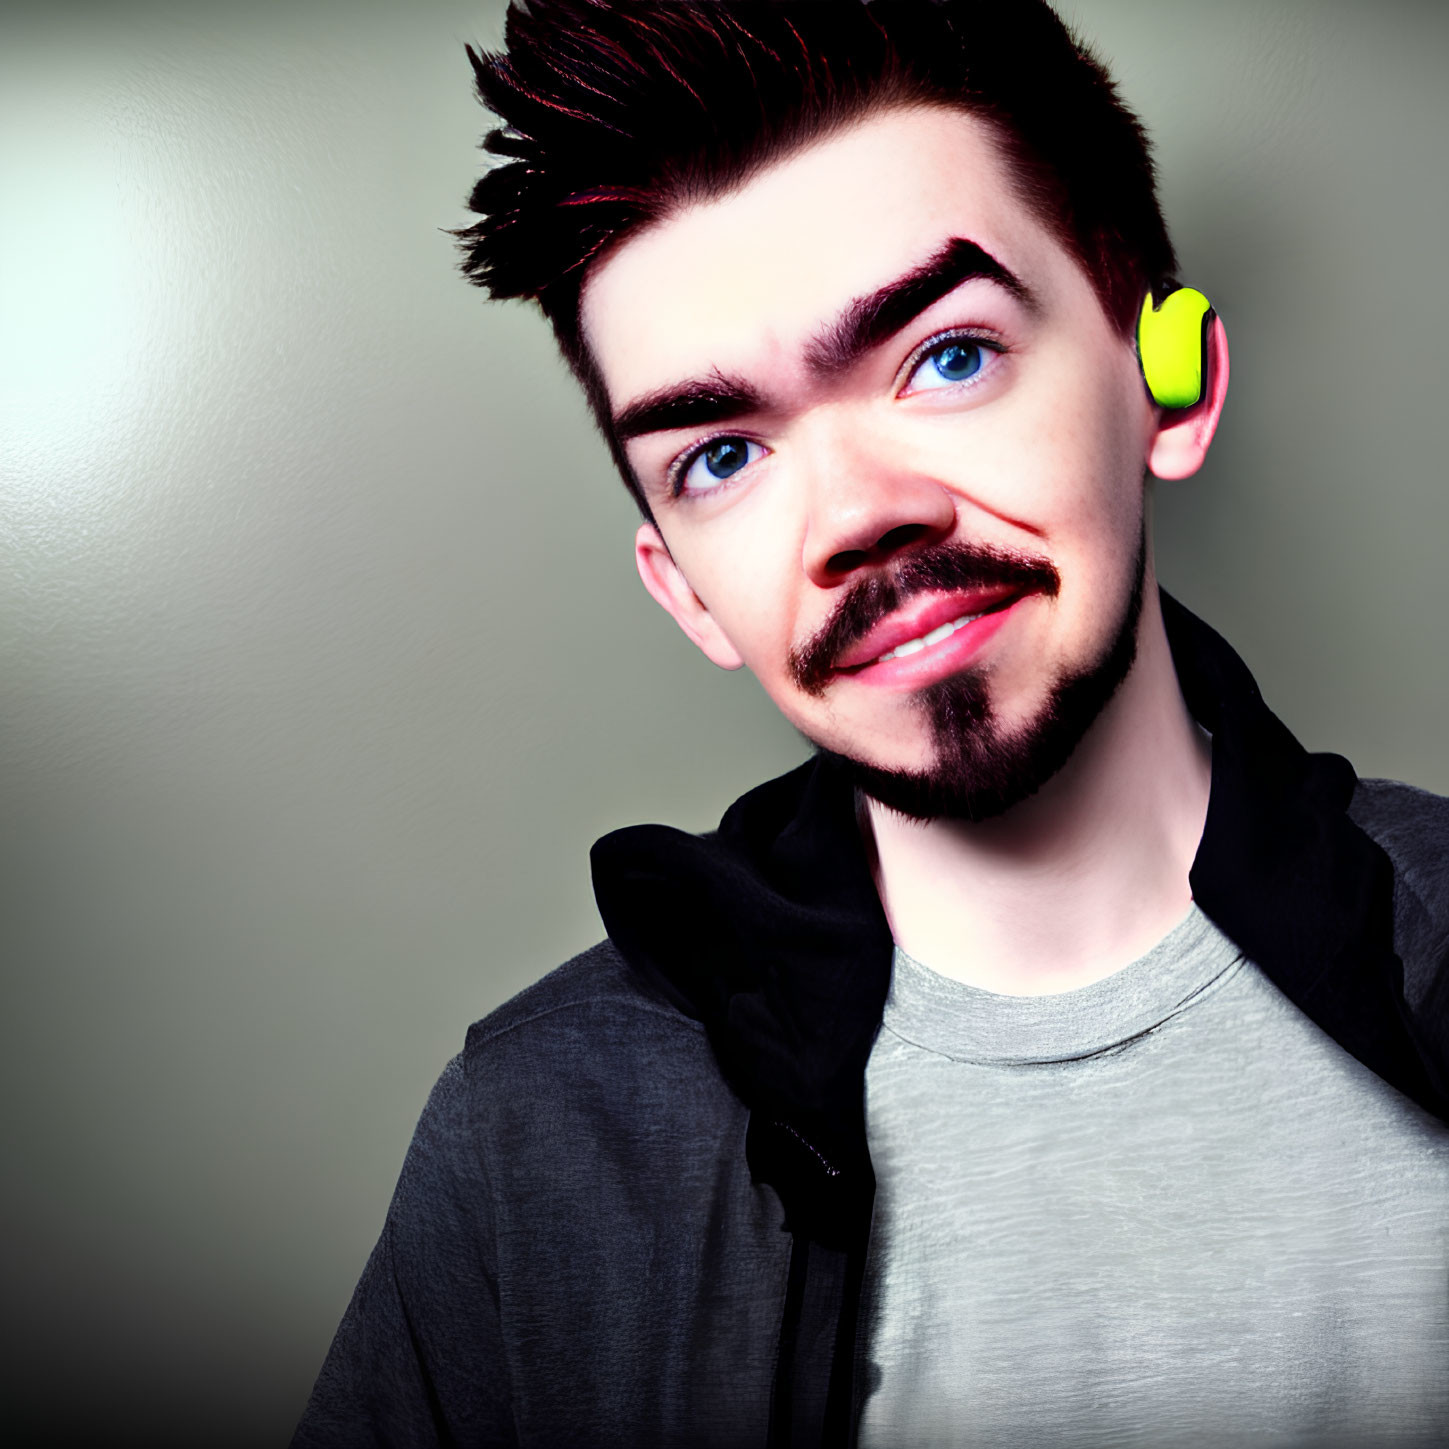 Young adult with styled hair, goatee, earring, grey shirt, and black hoodie smiling at